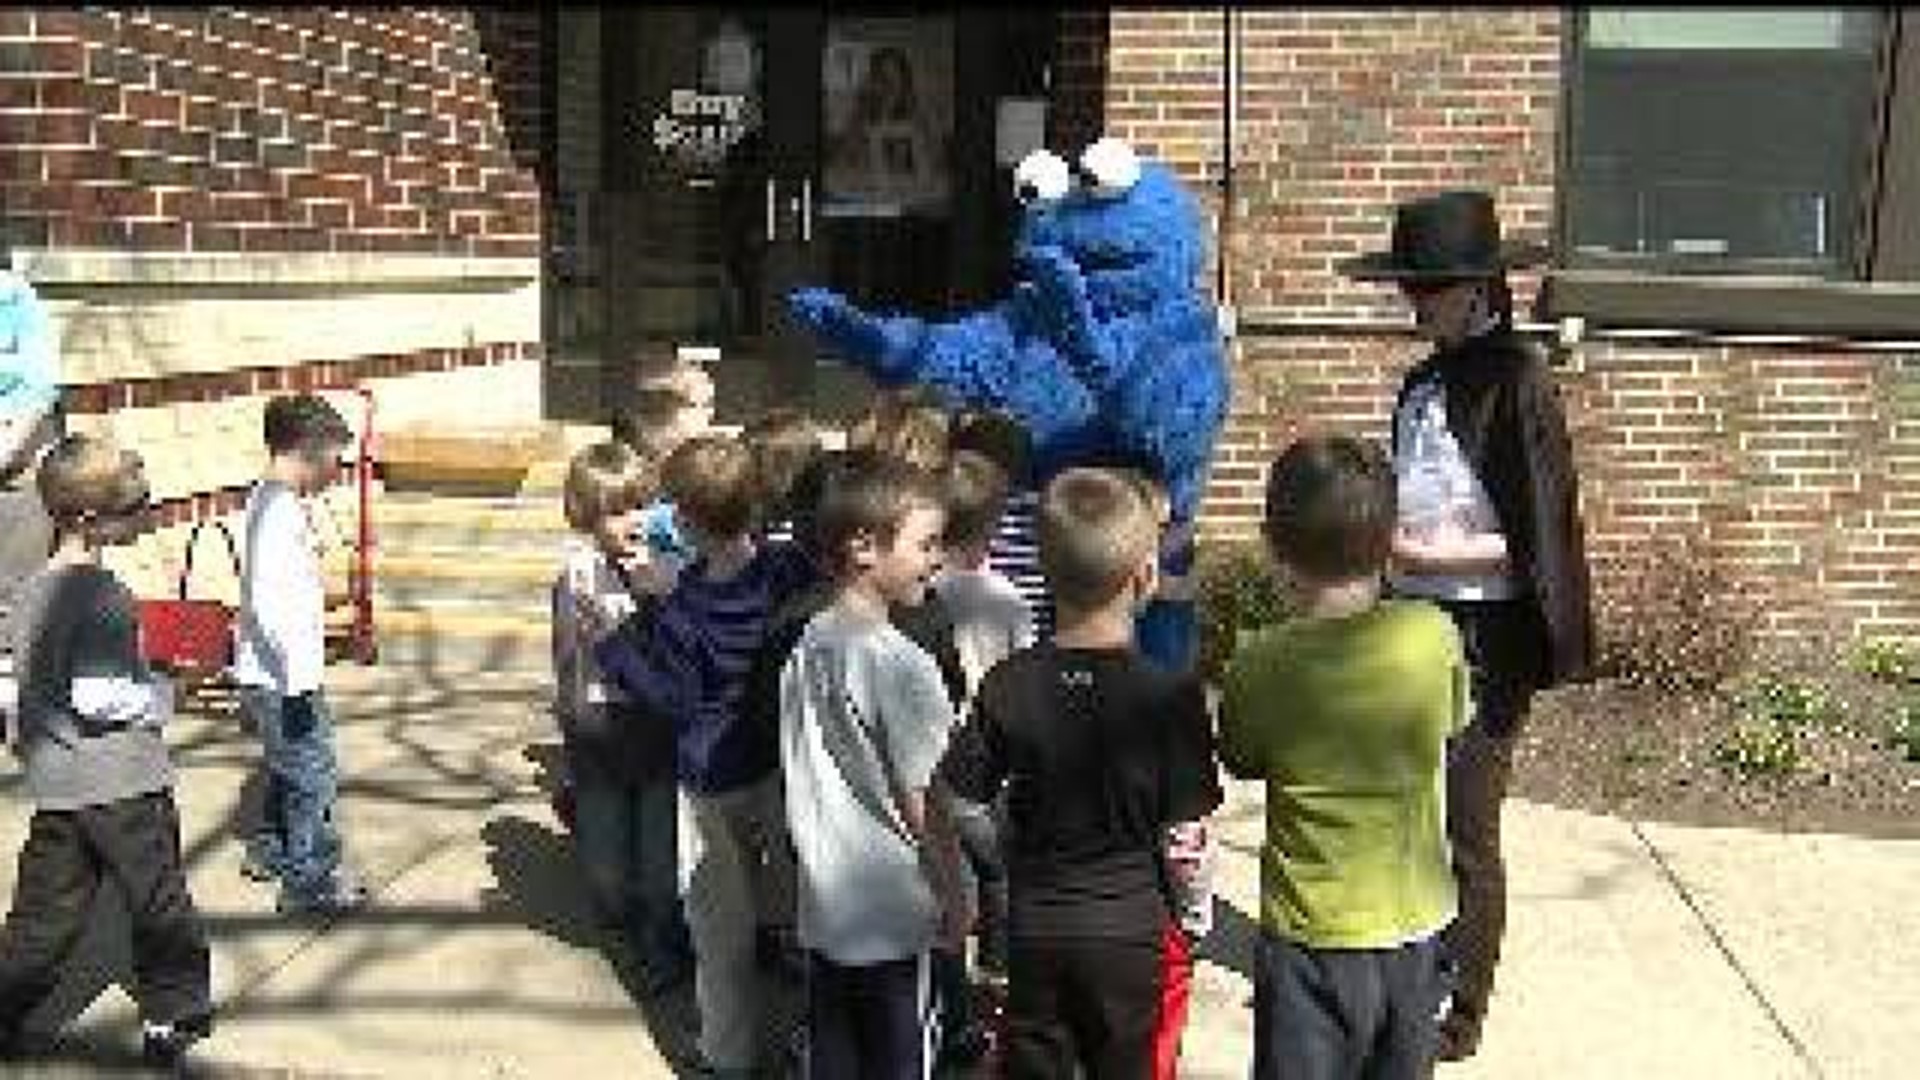 Hy-Vee sends their cookie monster to give a cookie party